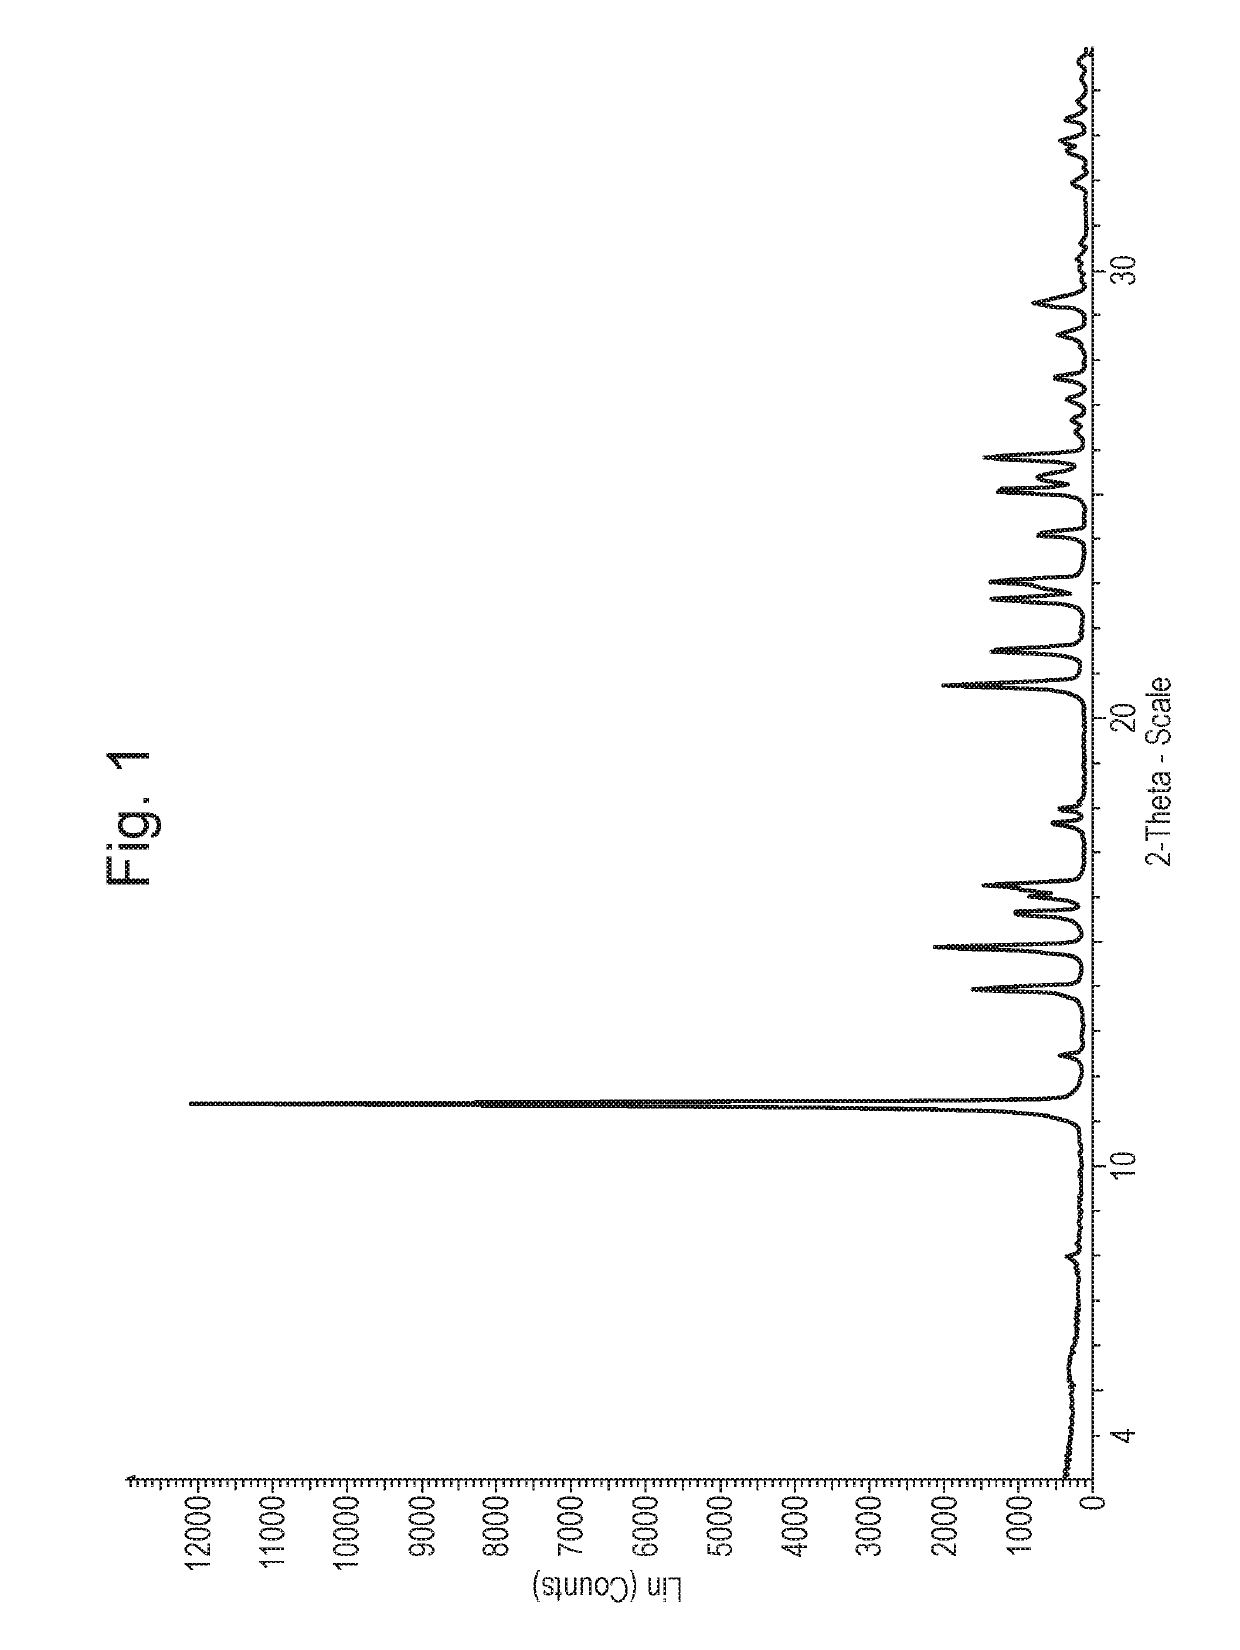 Crystalline diethylamine tetrathiomolybdate and its pharmaceutical uses